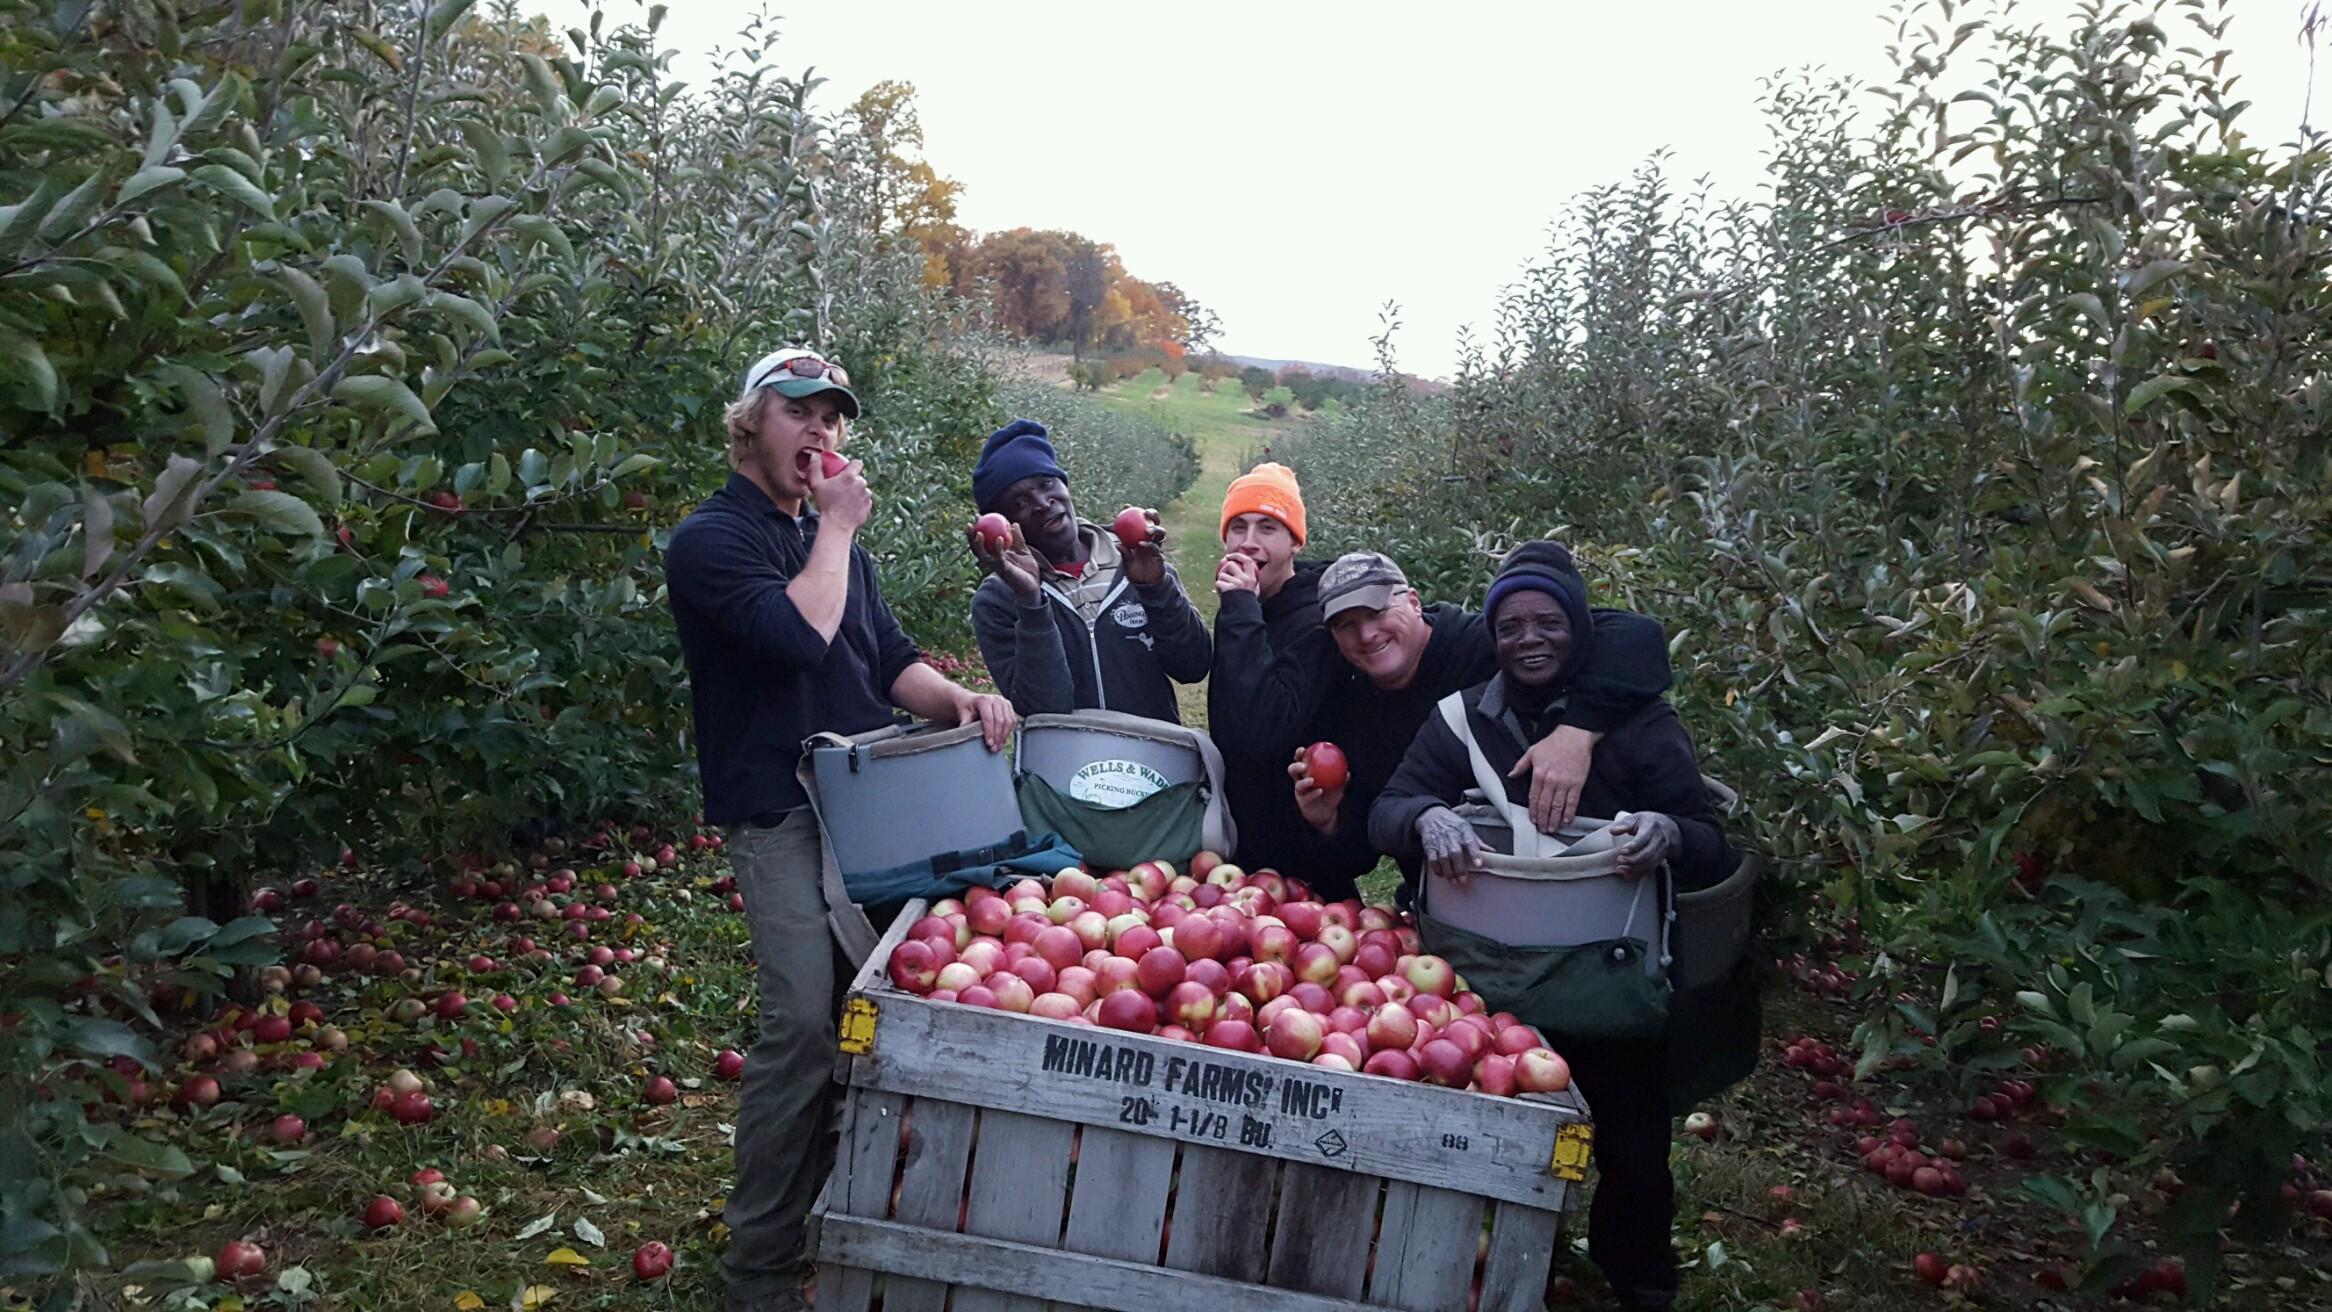 SJ and Stephen Pennings picking apples with employees